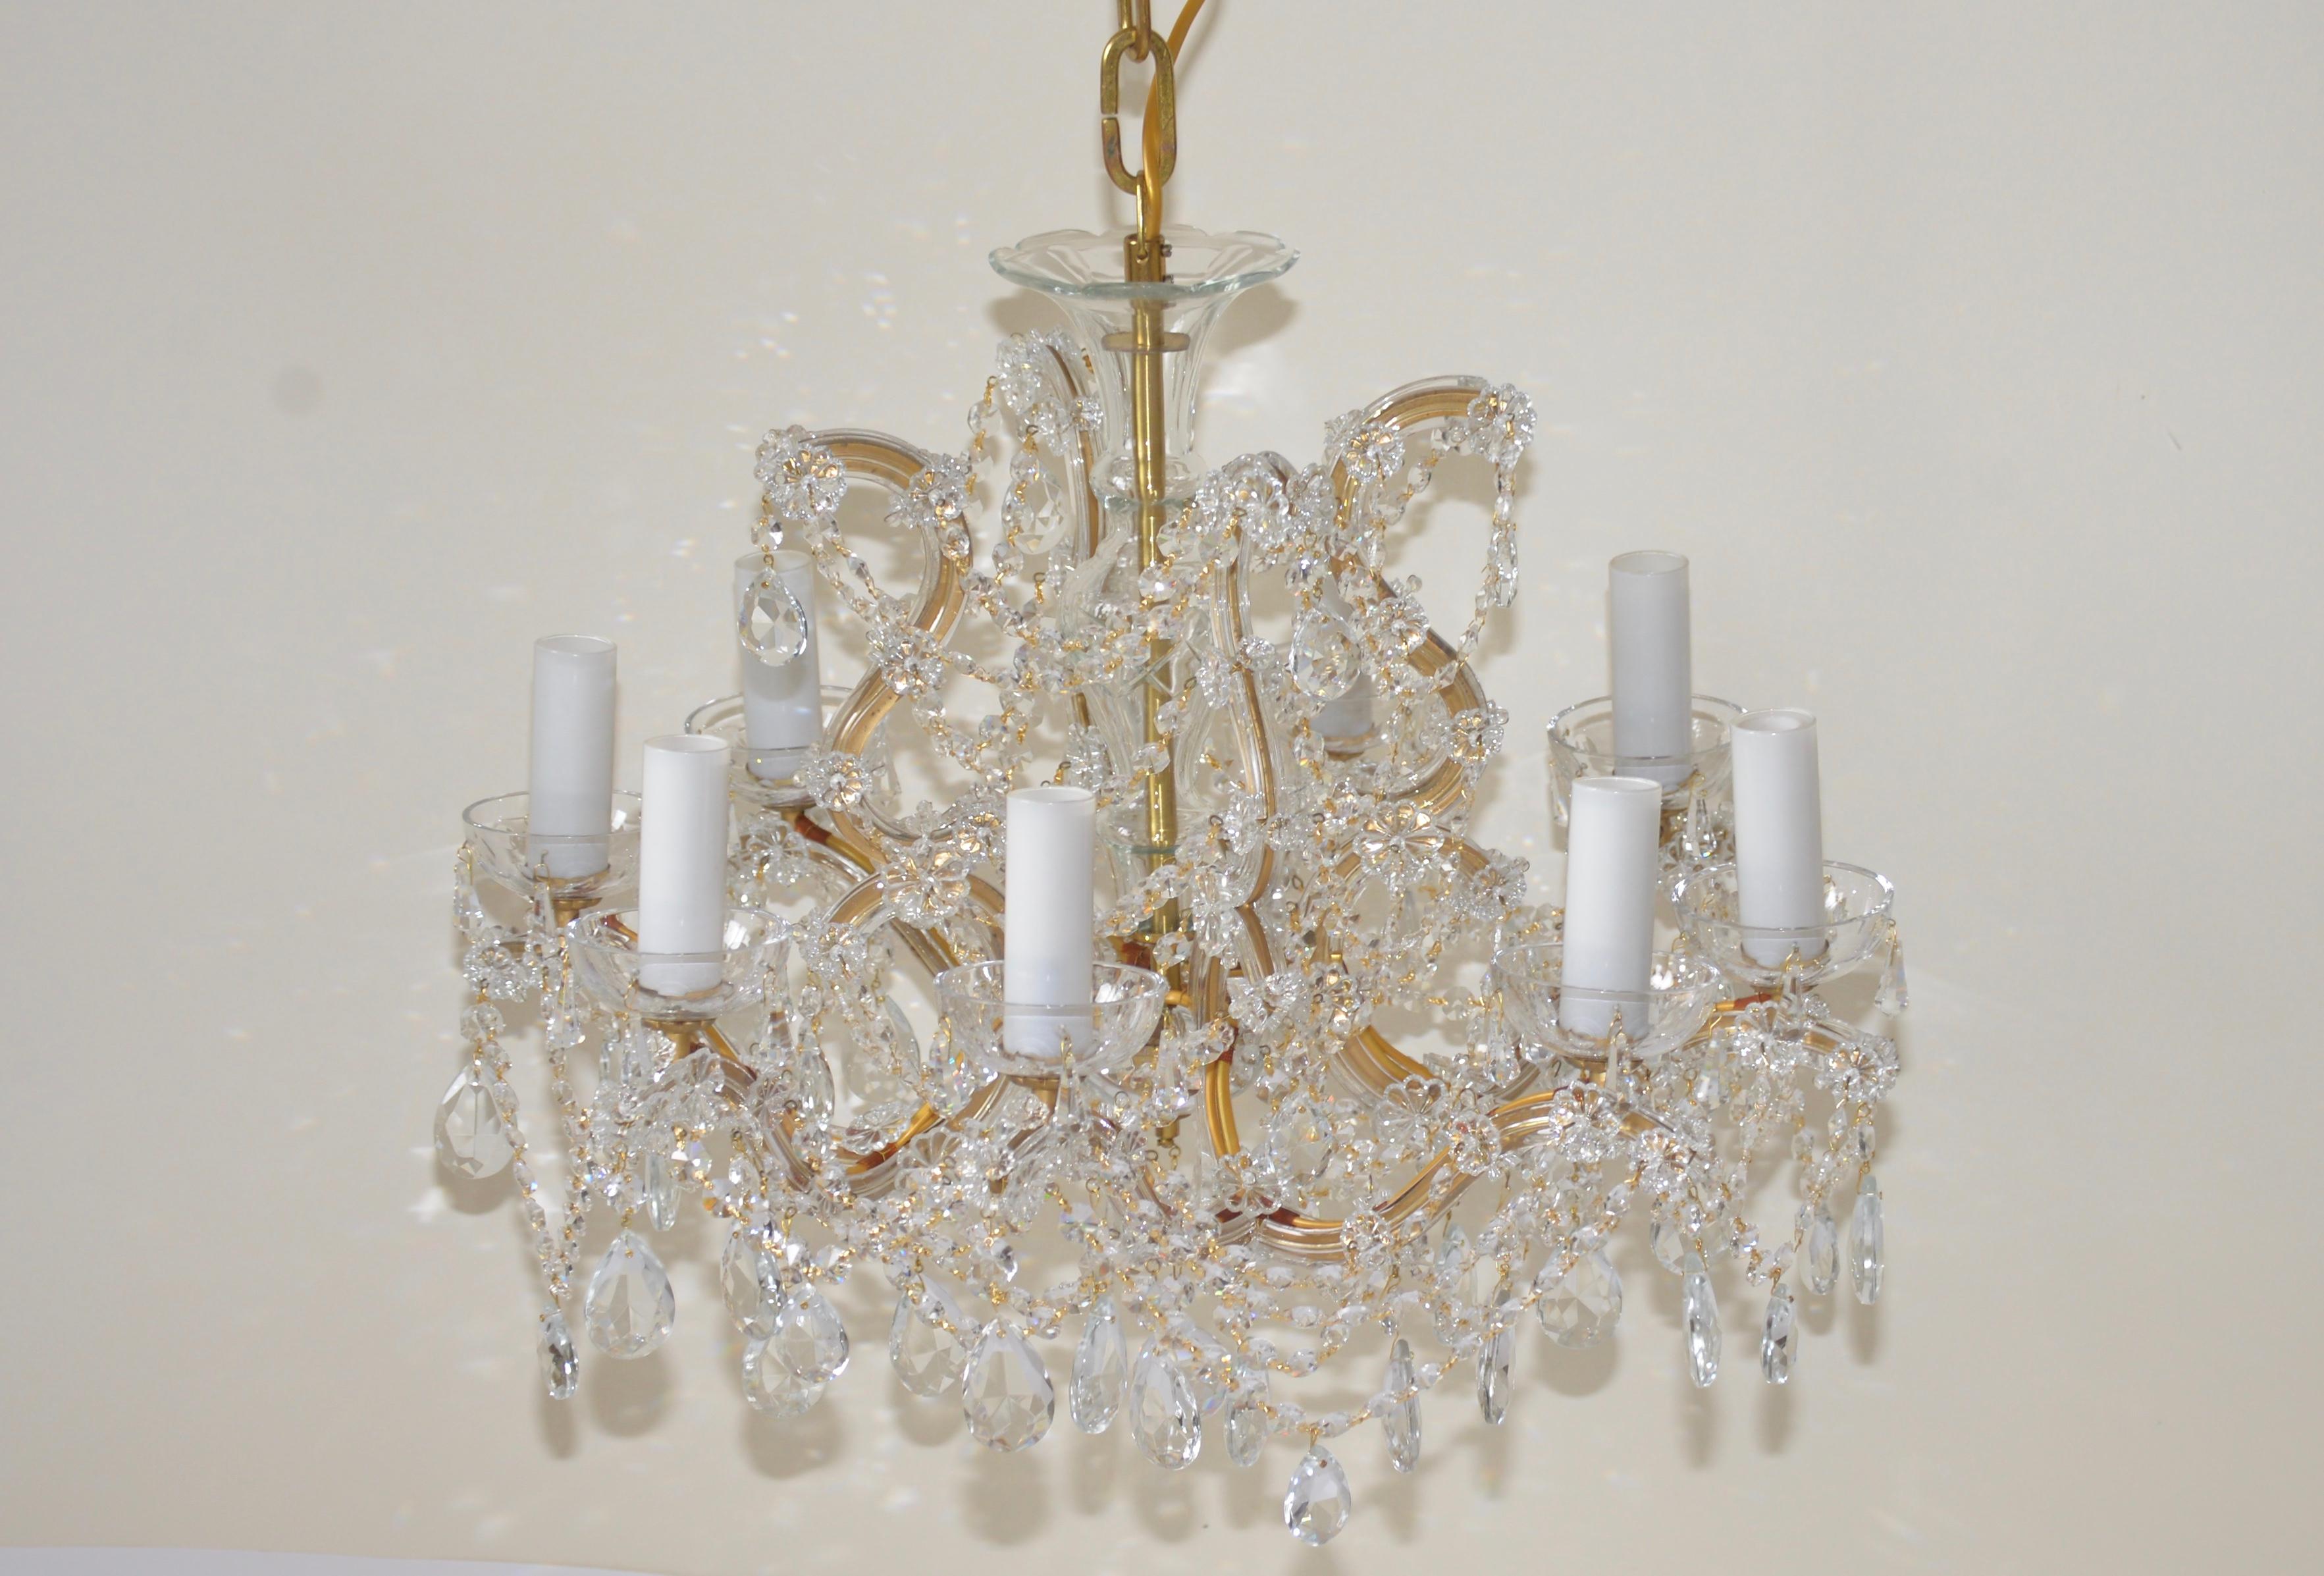 A beautiful handcut crystal Bohemian chandelier. This item has eight profiled glass arms with cut crystal octagons and pear drop shaped lead crystals in small and large sizes throughout this beautiful chandelier. There are eight candle bulb lights